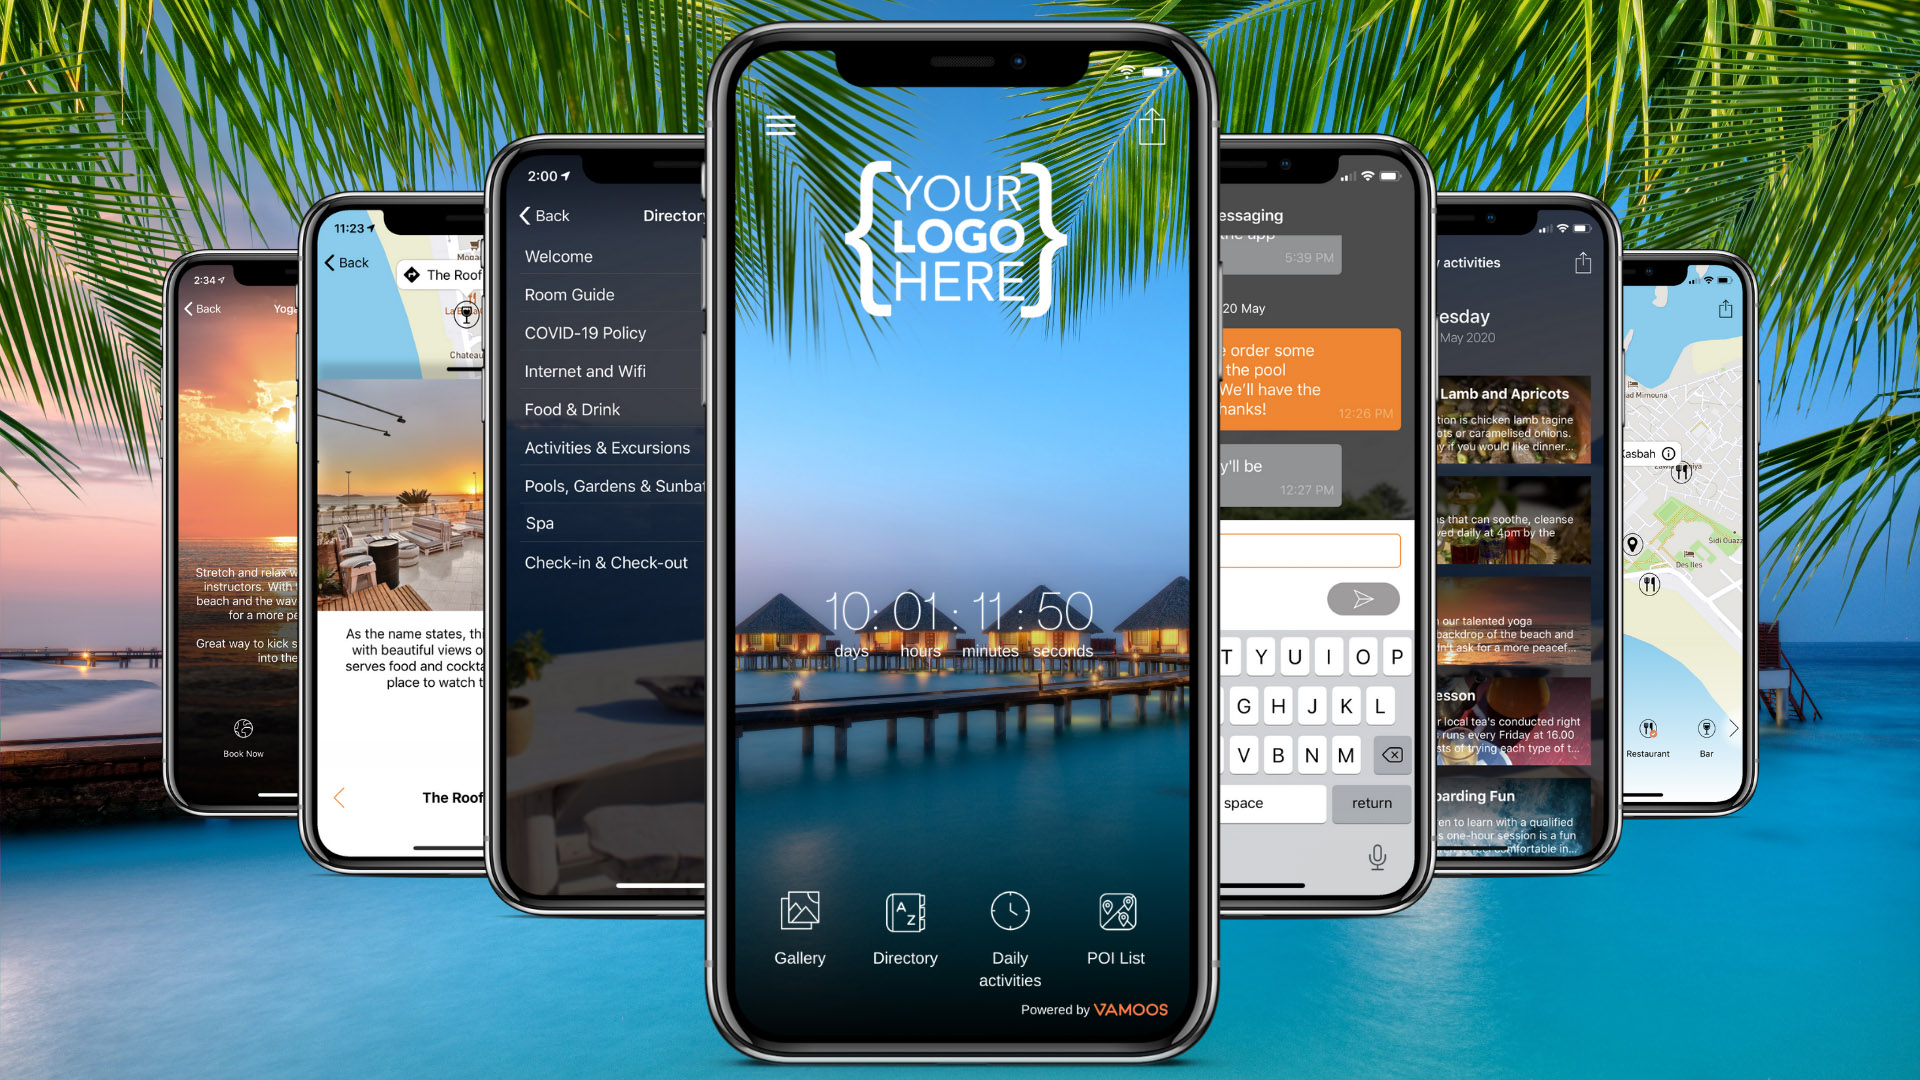 Vamoos, Contactless Hospitality and the ‘New Normal’ – Hotelier Maldives